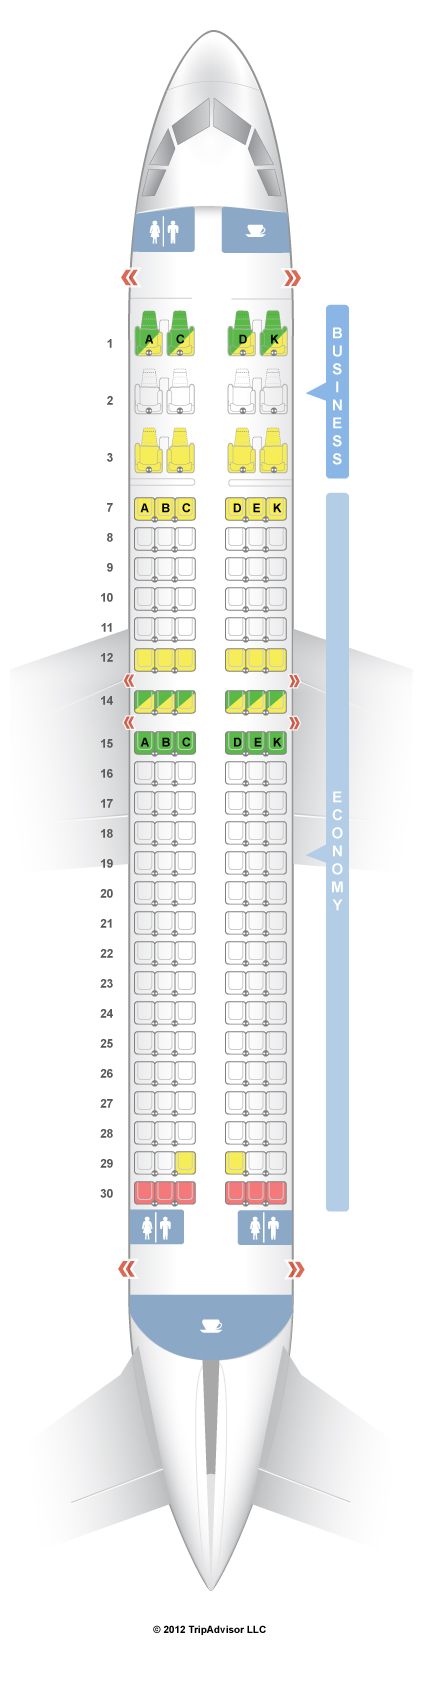 A320 Plane Seating Chart